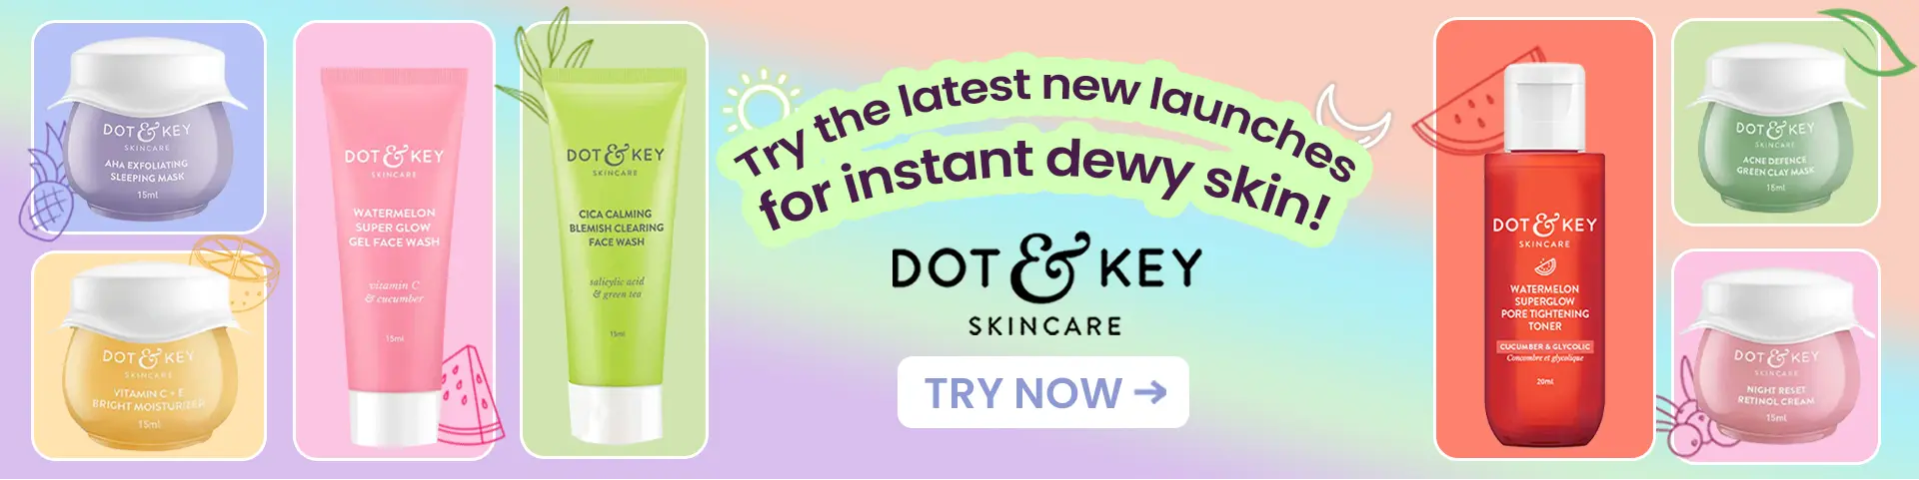 dot and key products for dry and oily skins